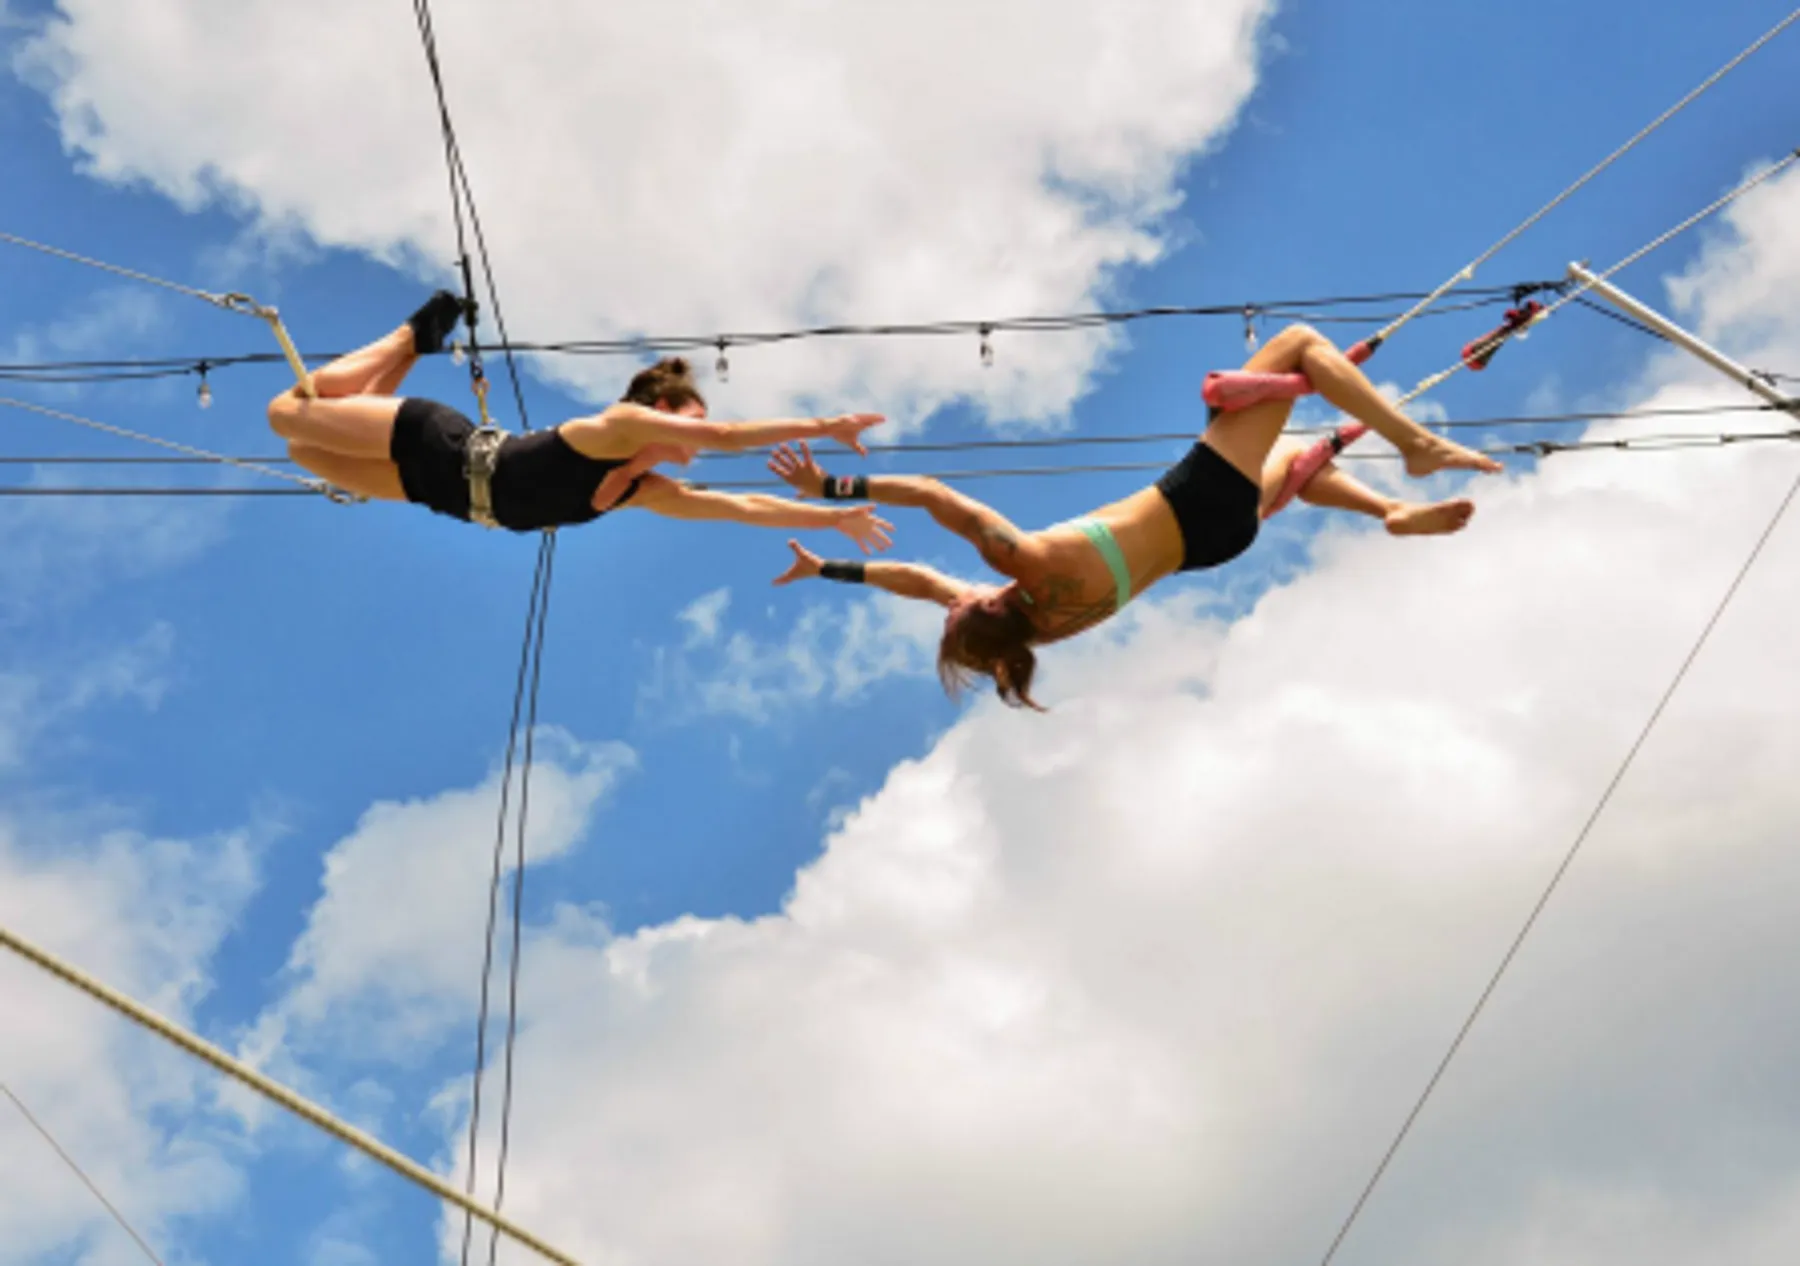 Two women on trapeze bars reach for one another in the air.